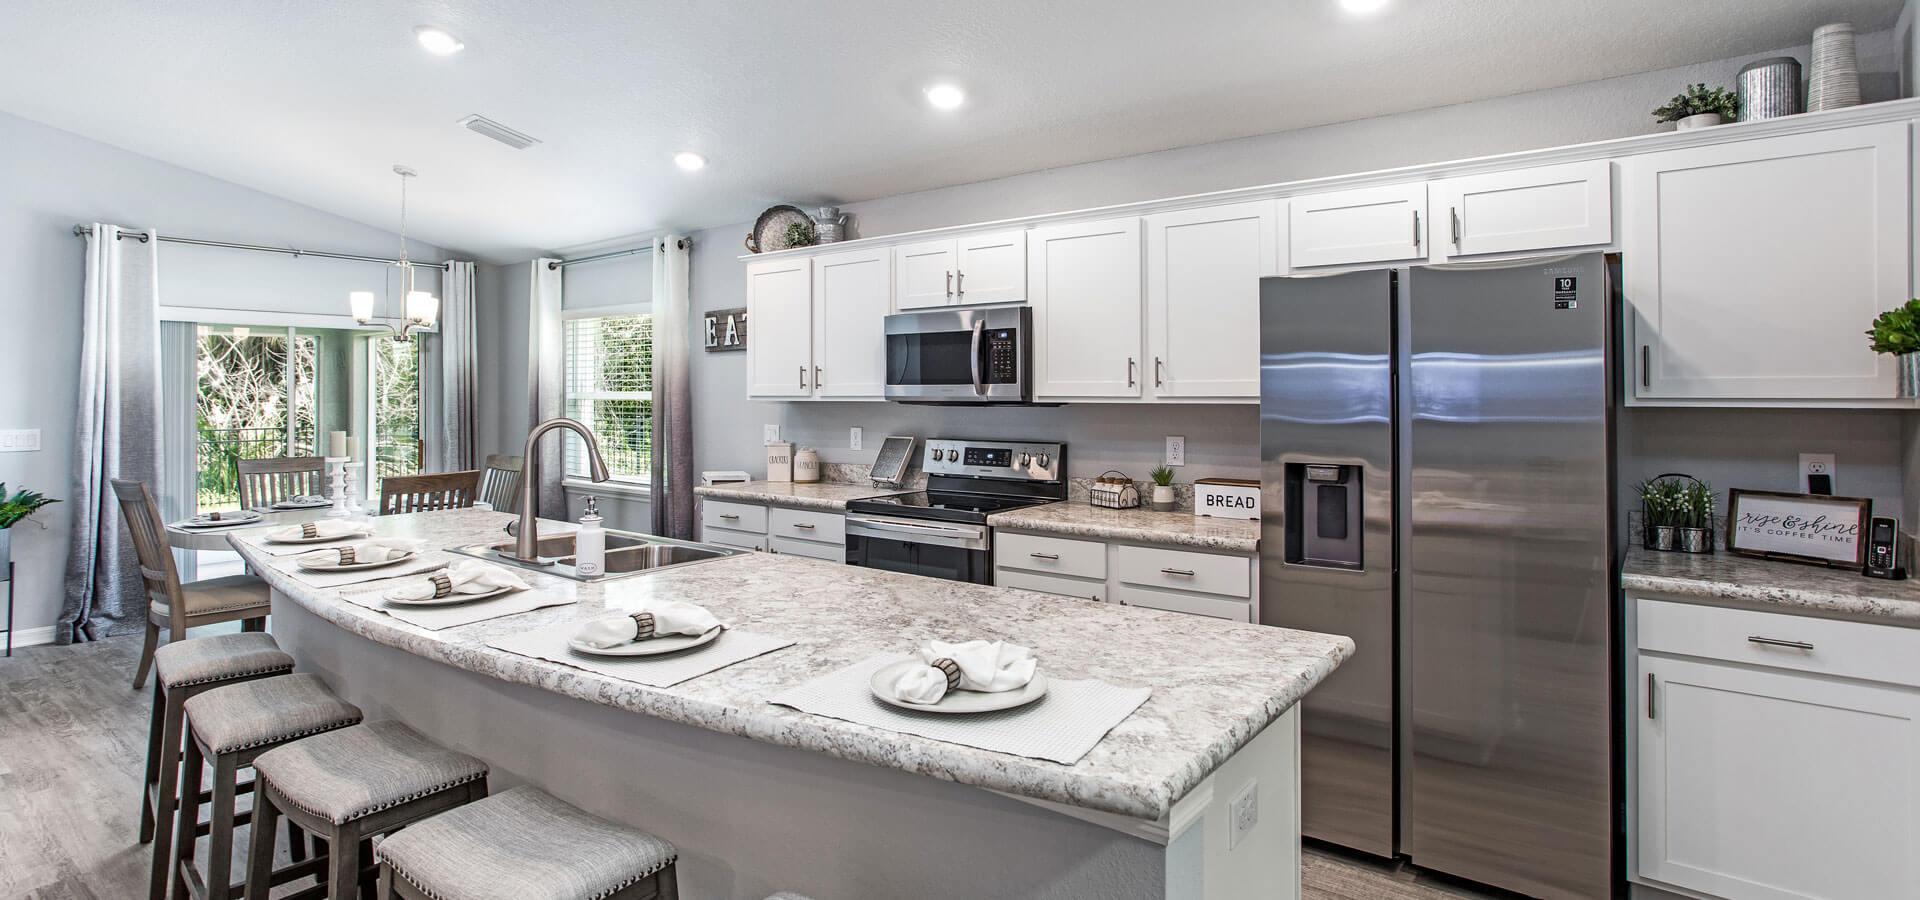 Open kitchen with white cabinets and stainless steel appliances in the Raychel, a new home plan by Highland Homes